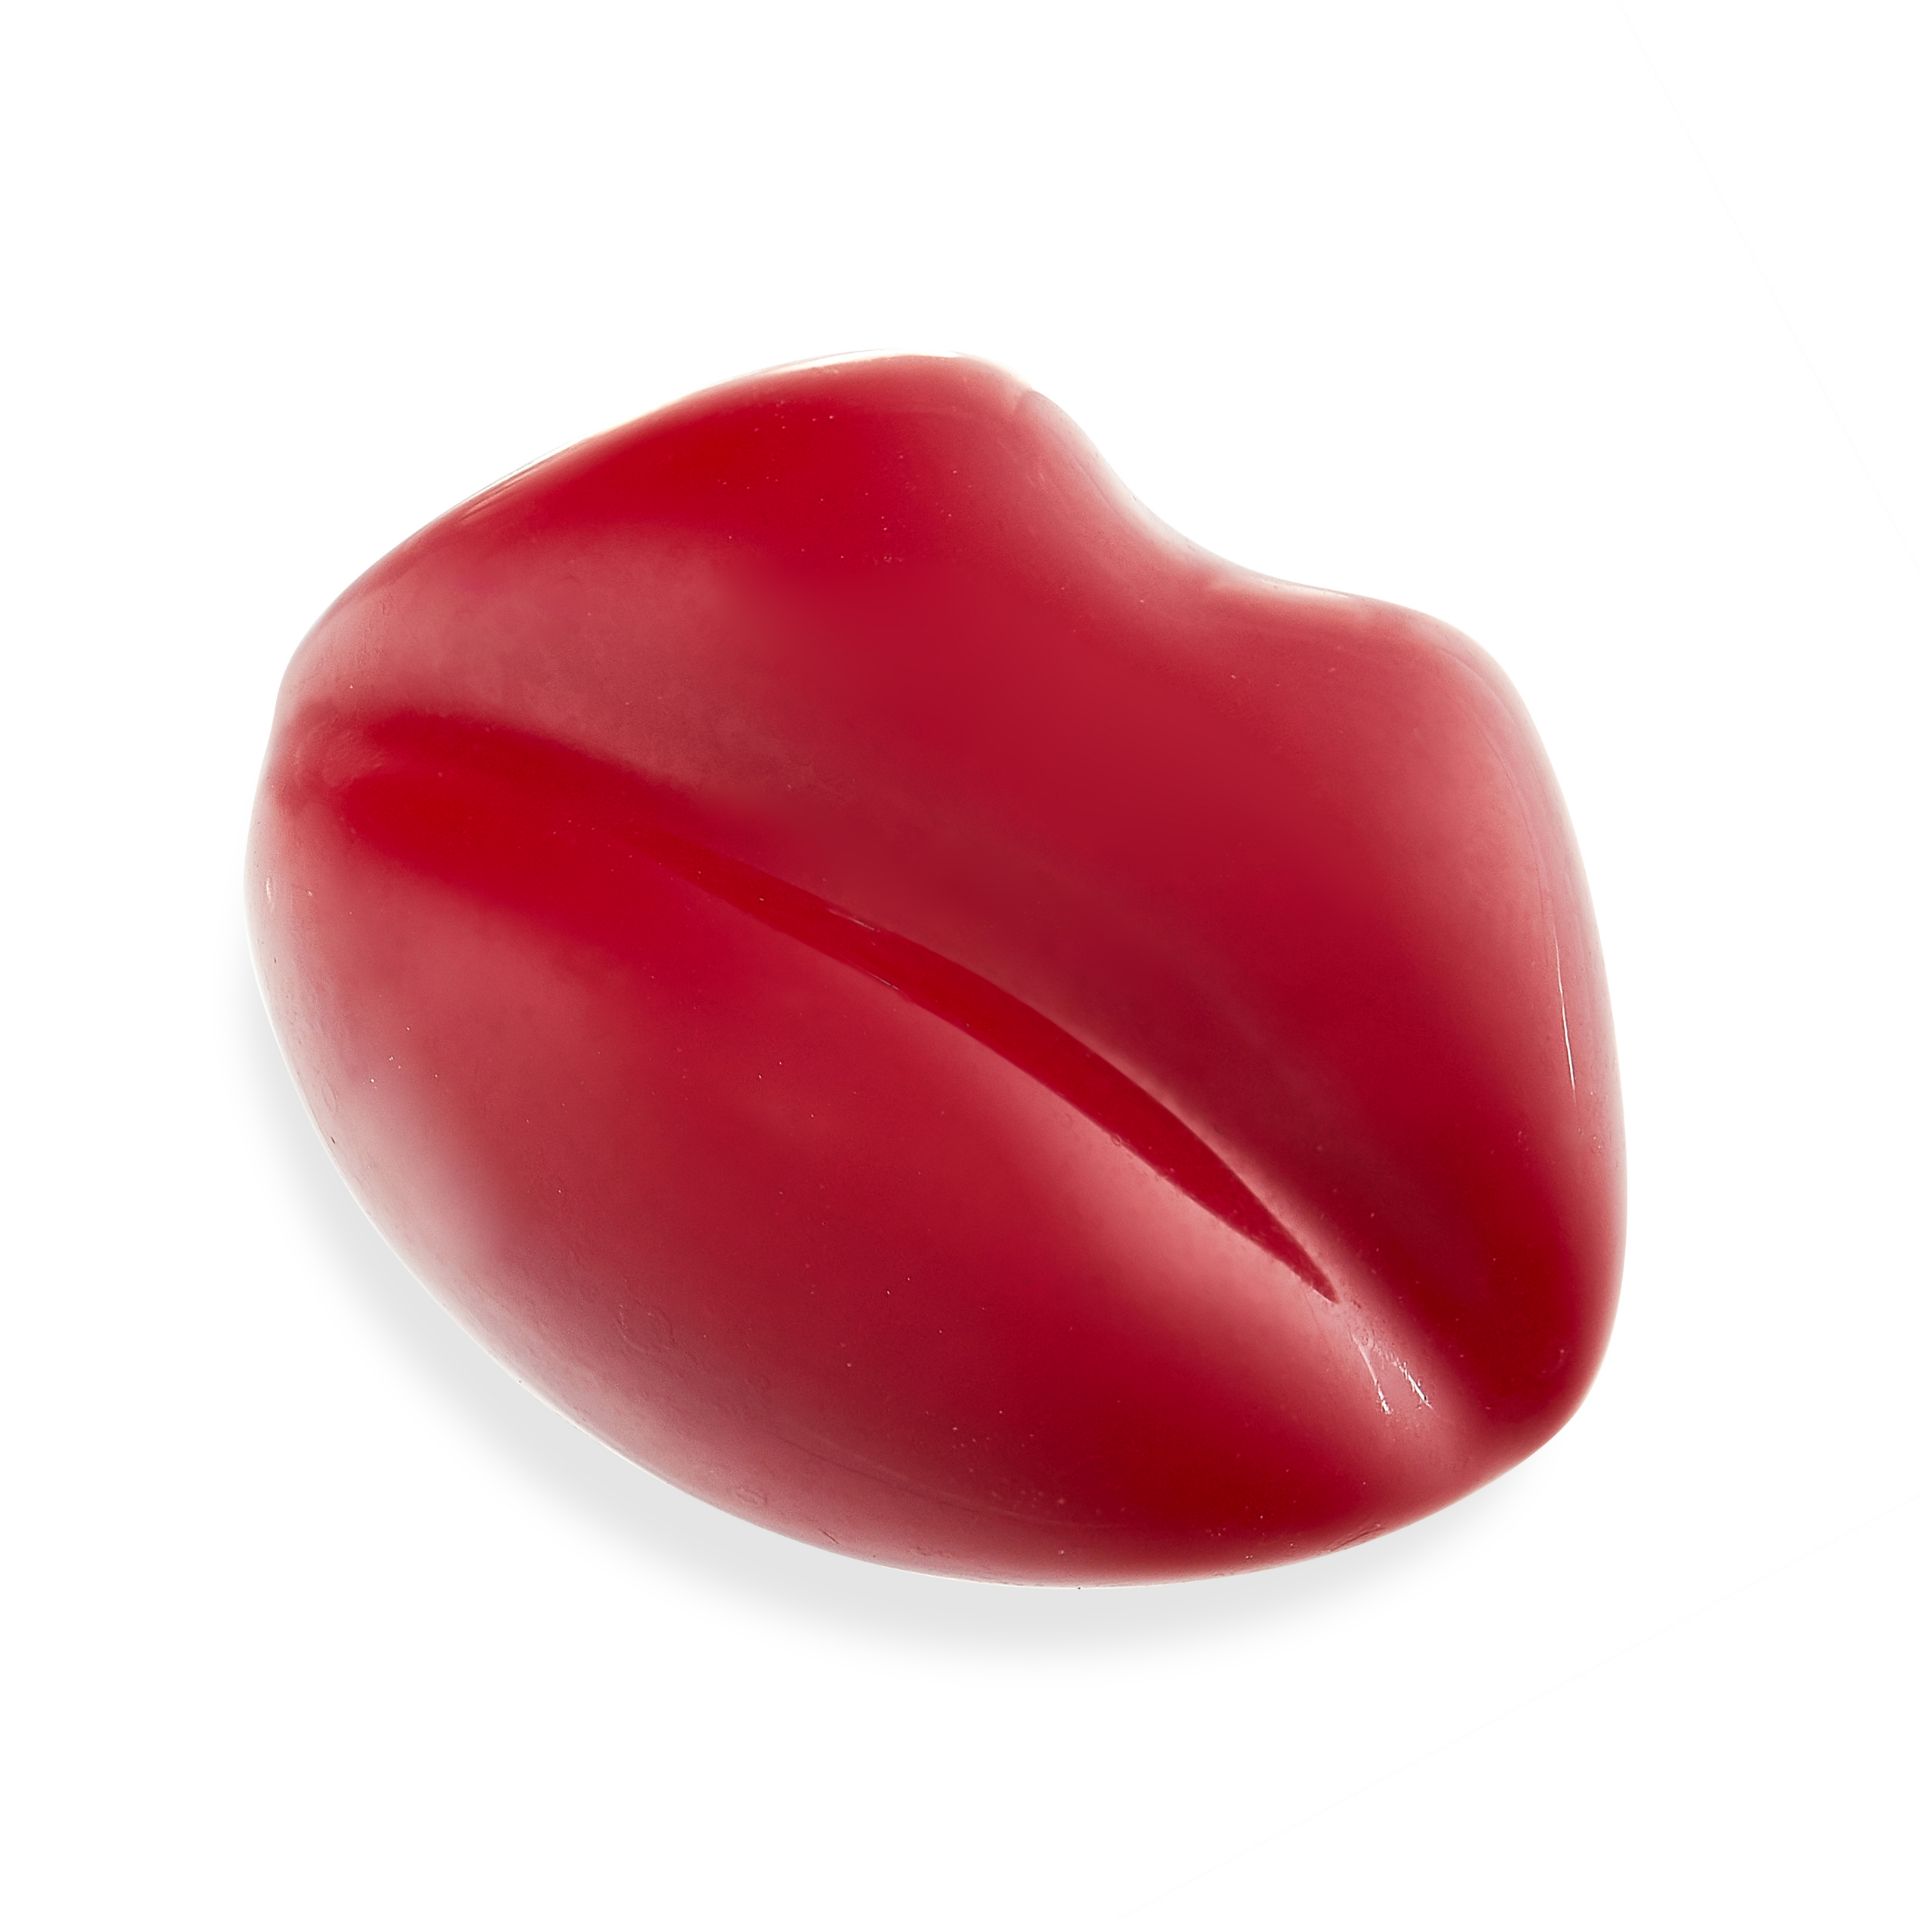 ENAMEL ' SCARLET LIPS' RING, MATTIOLI in the design of a lip, set with red enamel, stamped 750, size